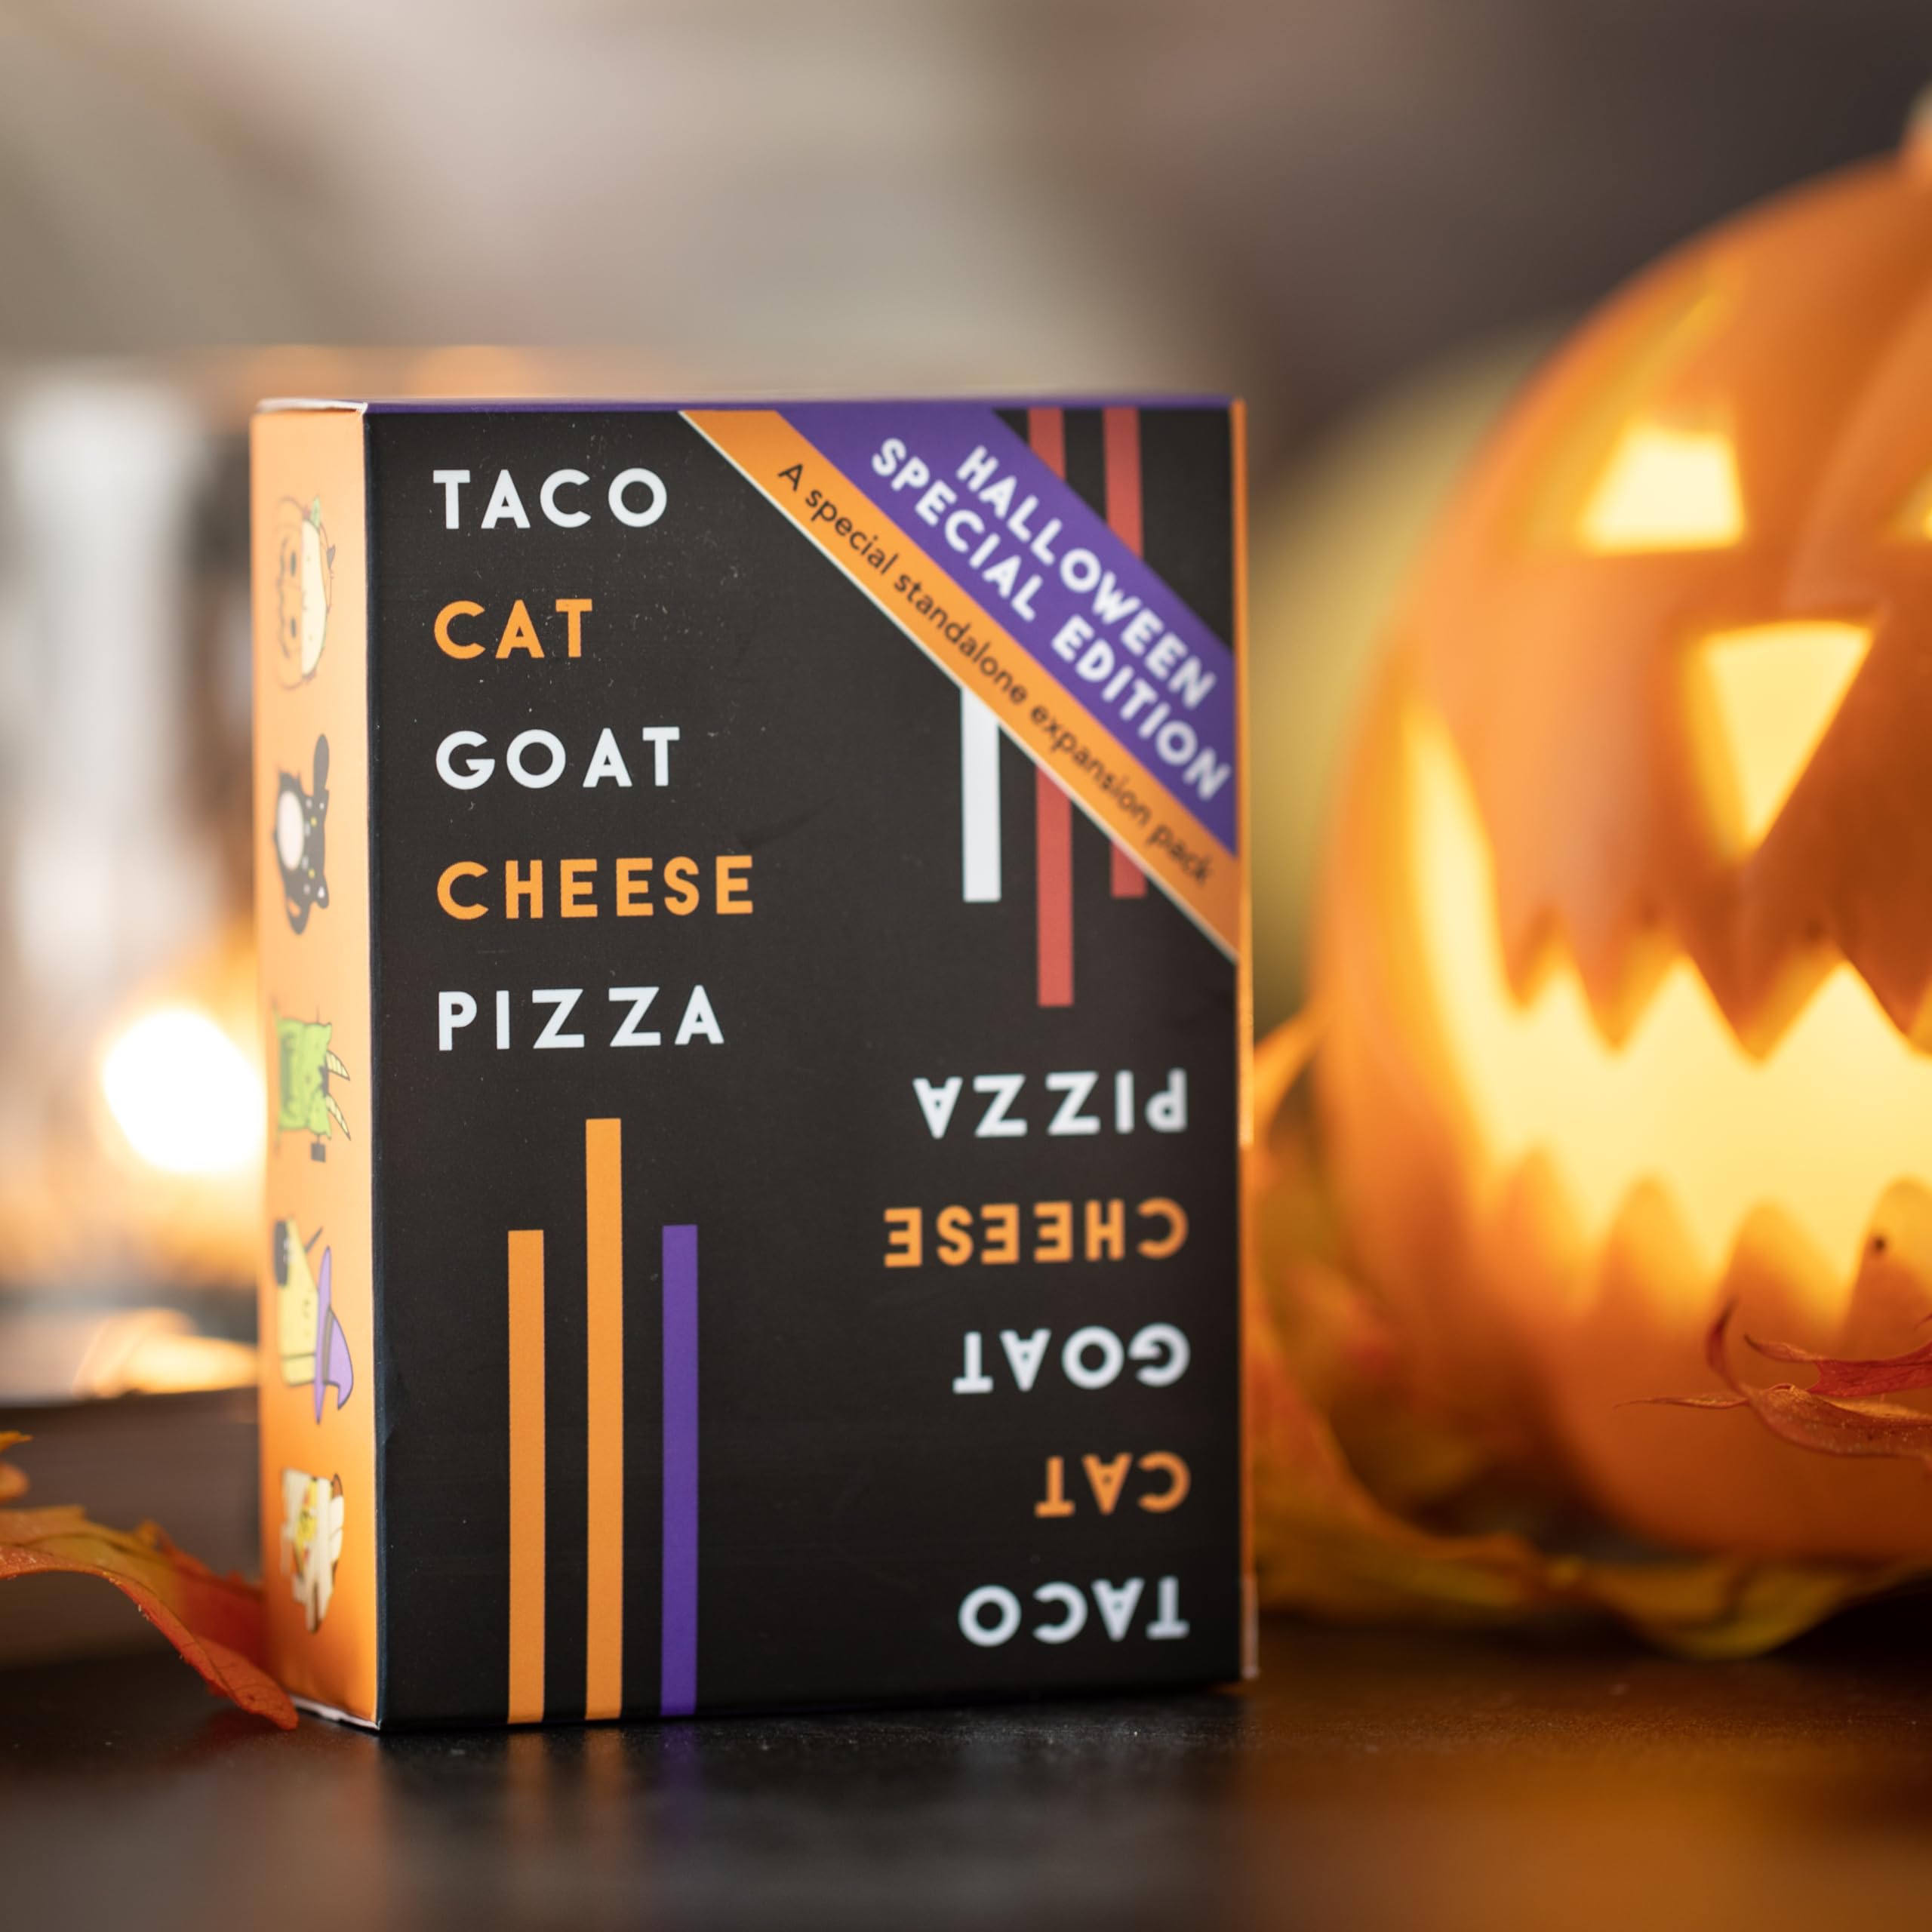 Taco Cat Goat Cheese Pizza – Halloween Edition – Halloween Party Games for Kids and Adults - Halloween Party Favors, Halloween School Party Prize, Trick or Treat Gift, Kids Ages 8+